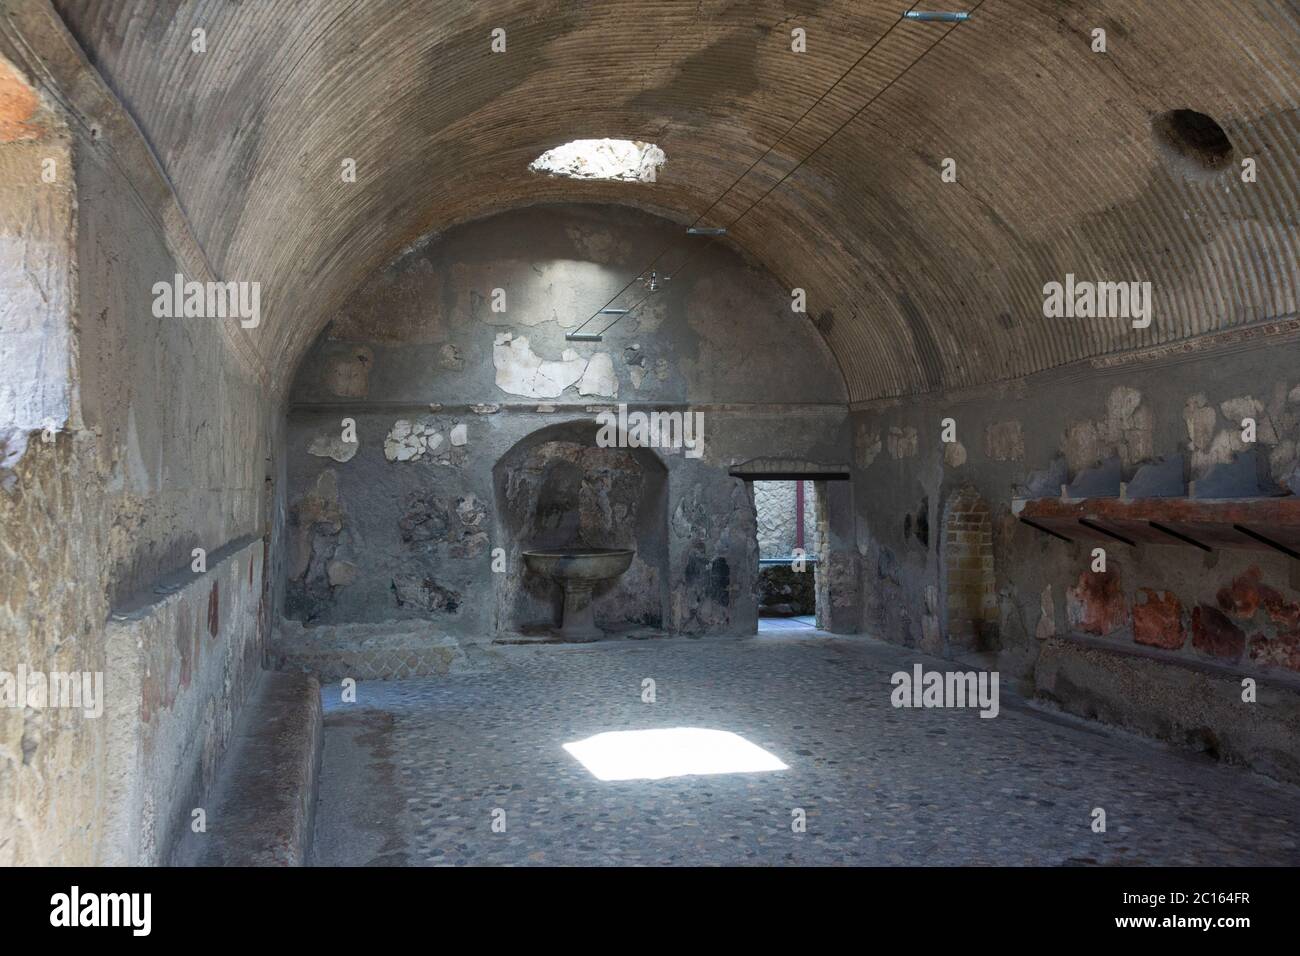 The Apodyterium (changing room) in the Roman baths has a vaulted ceiling decorated with stucco, the floor is paved in opus scutulatum. Herculaneum Stock Photo